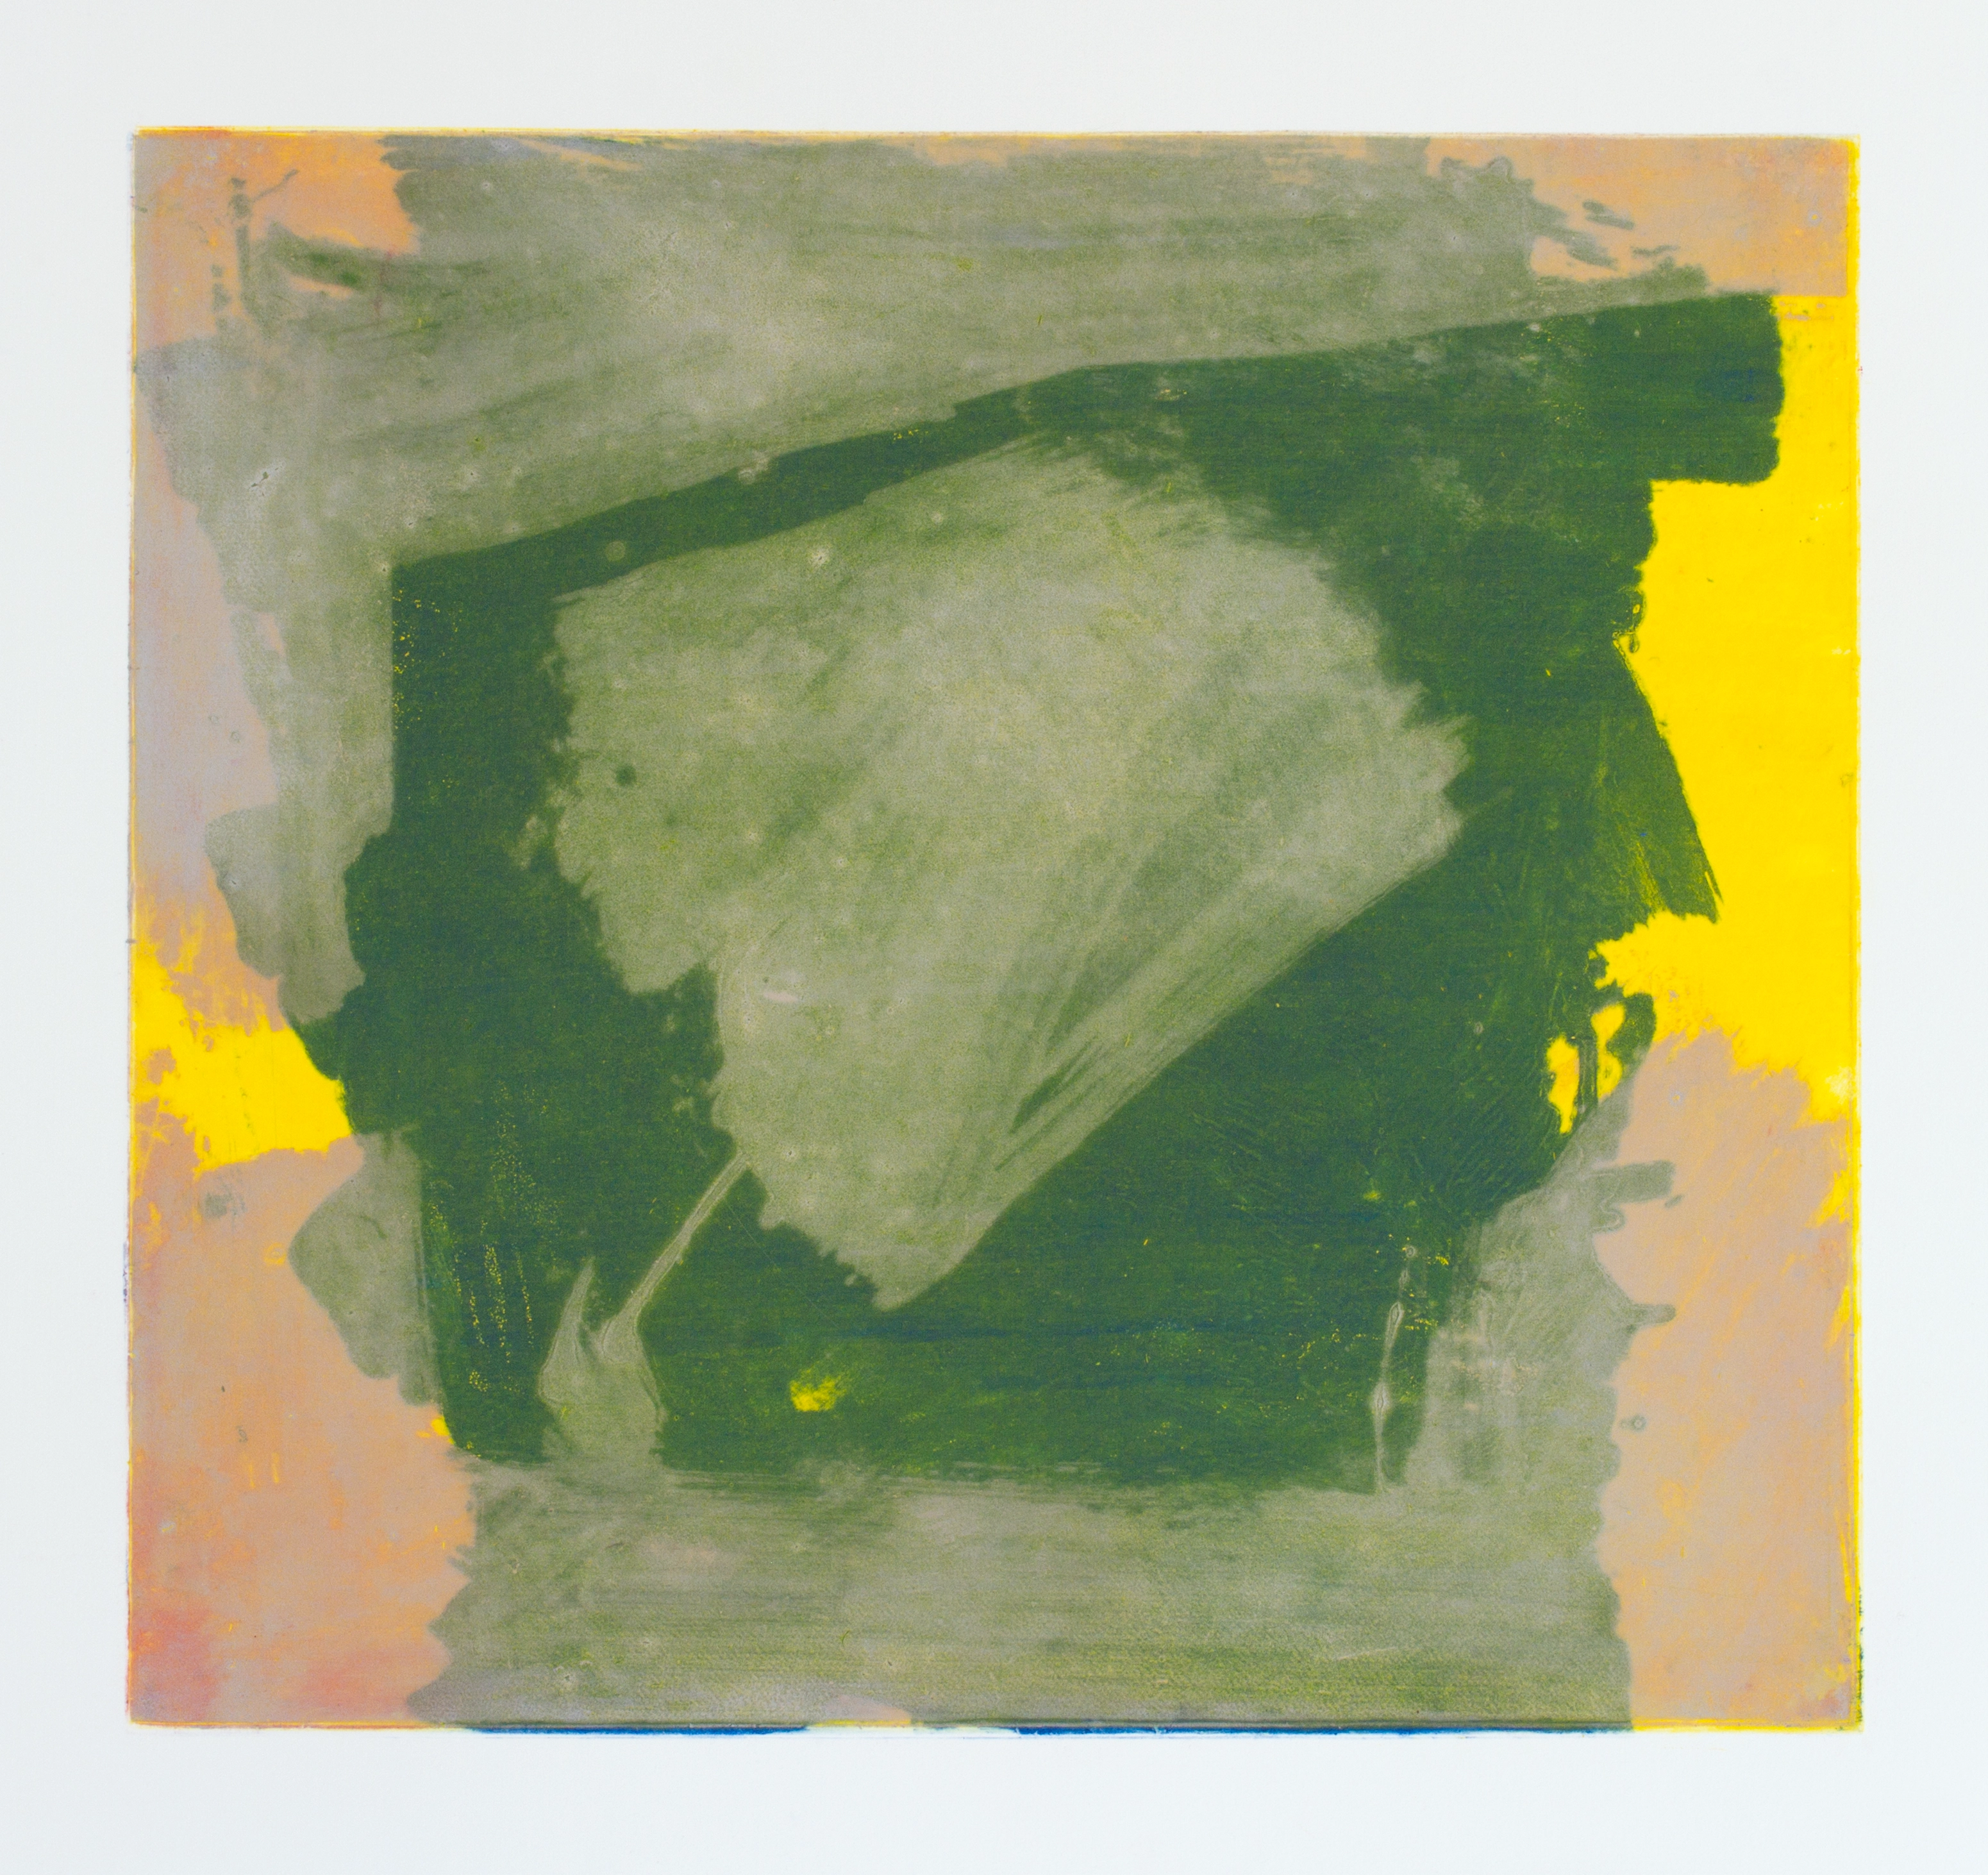 Monoprint on paper with a centered light green form; a dark green open square is layered on top, and the background is yellow and beige.